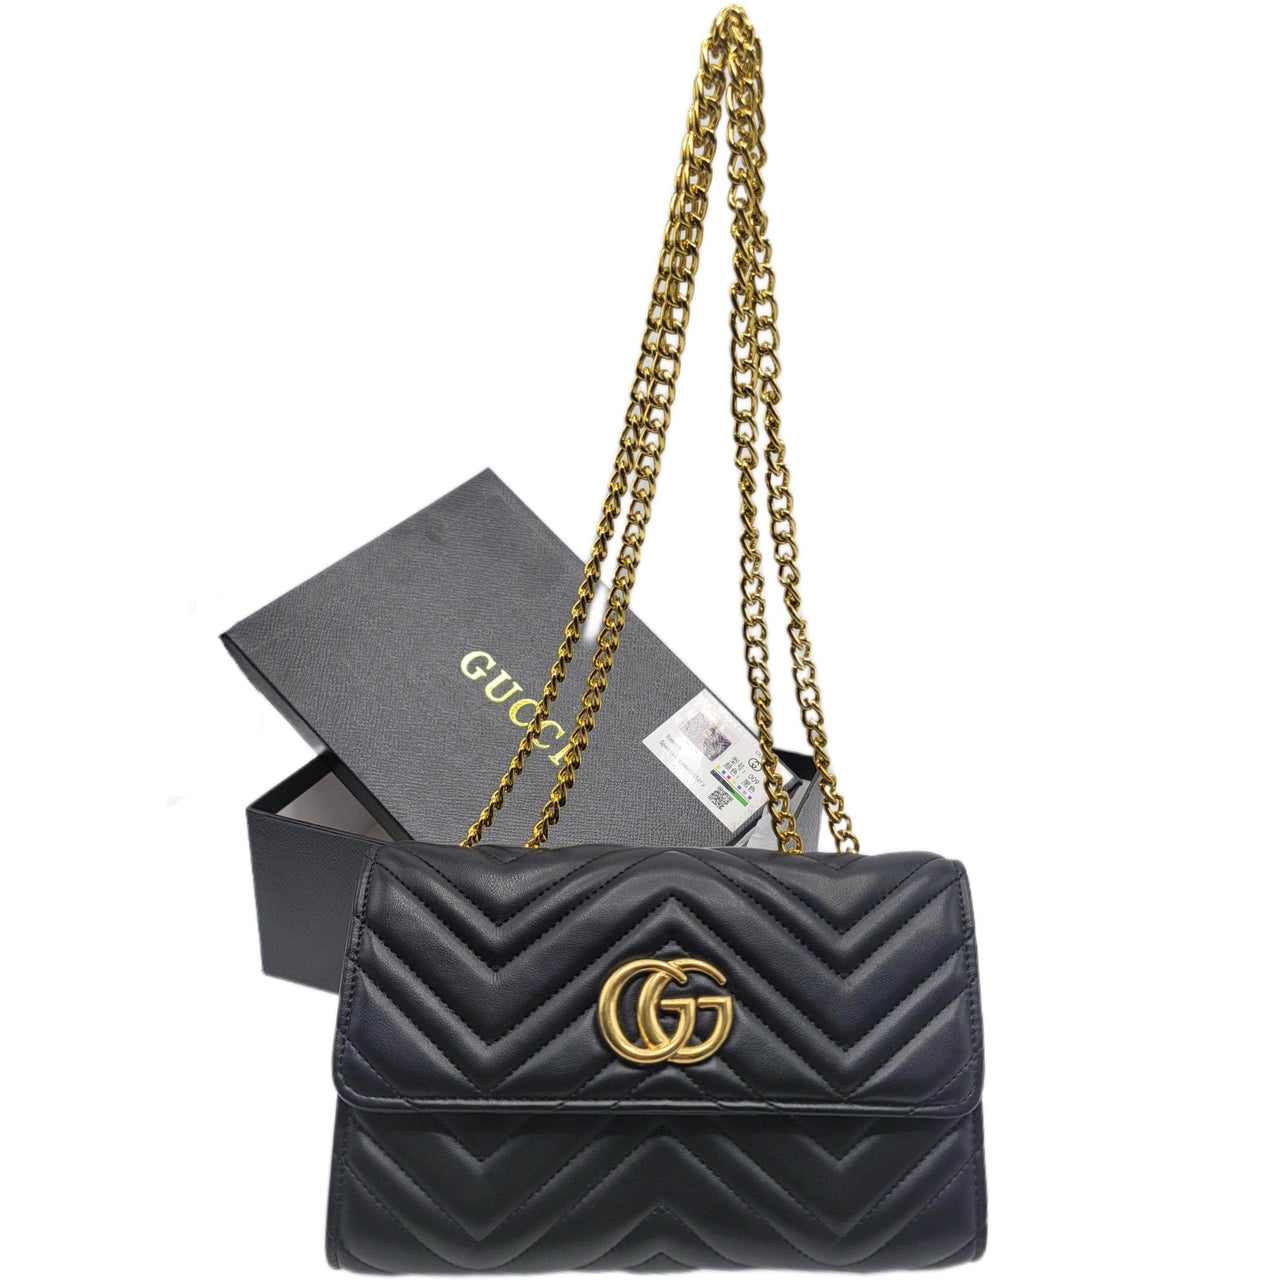 The Bag Couture Handbags, Wallets & Cases Gucci Handbag Quilted BG